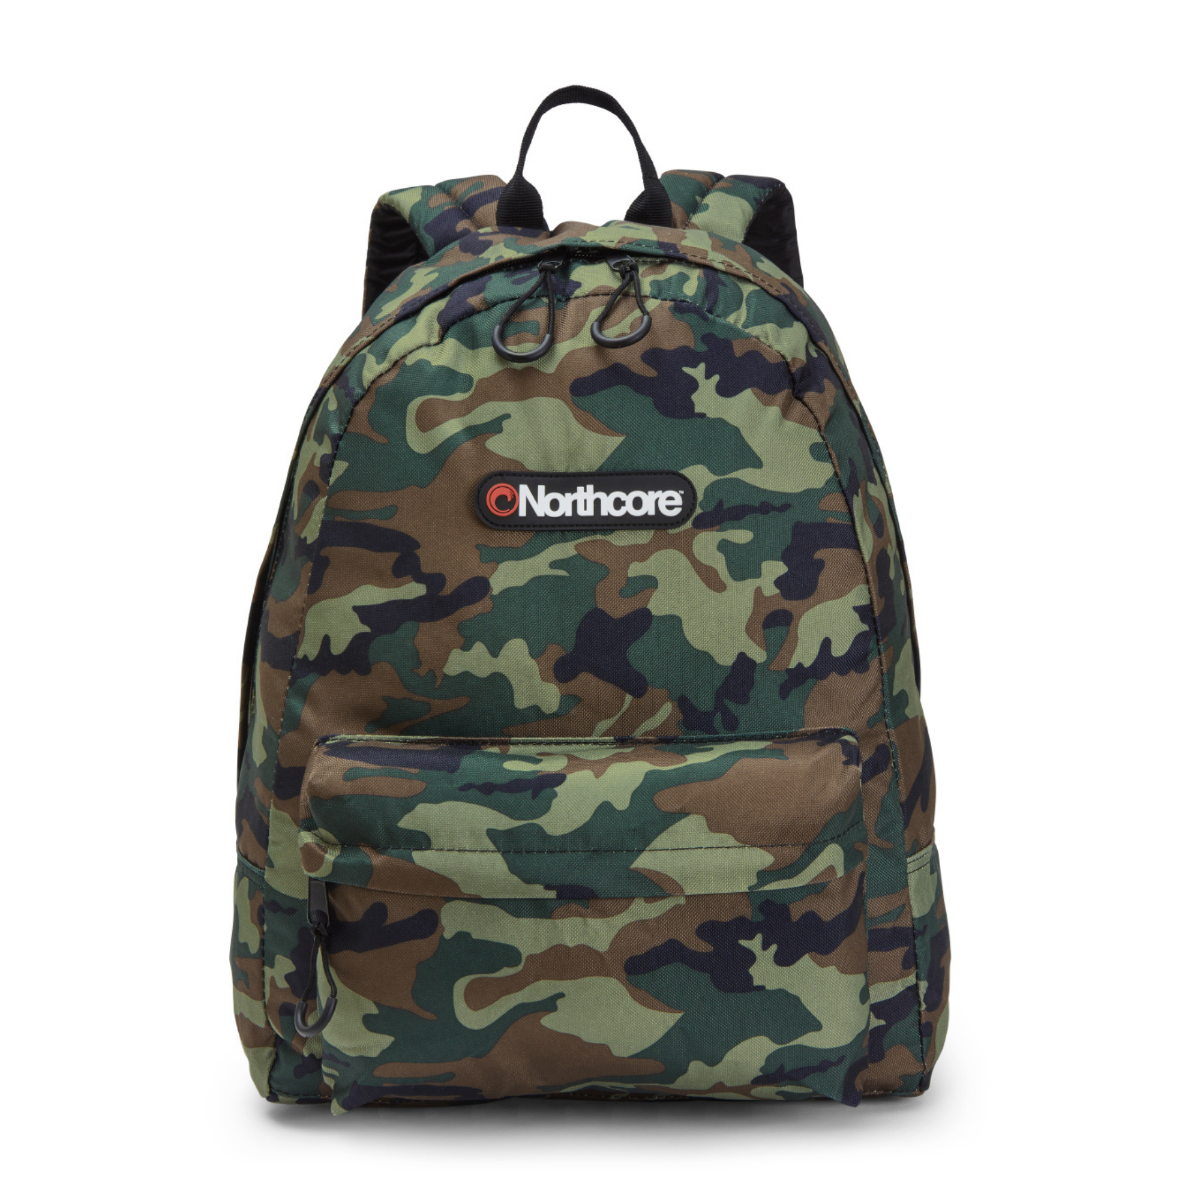 Northcore Essentials Backpack- Camo